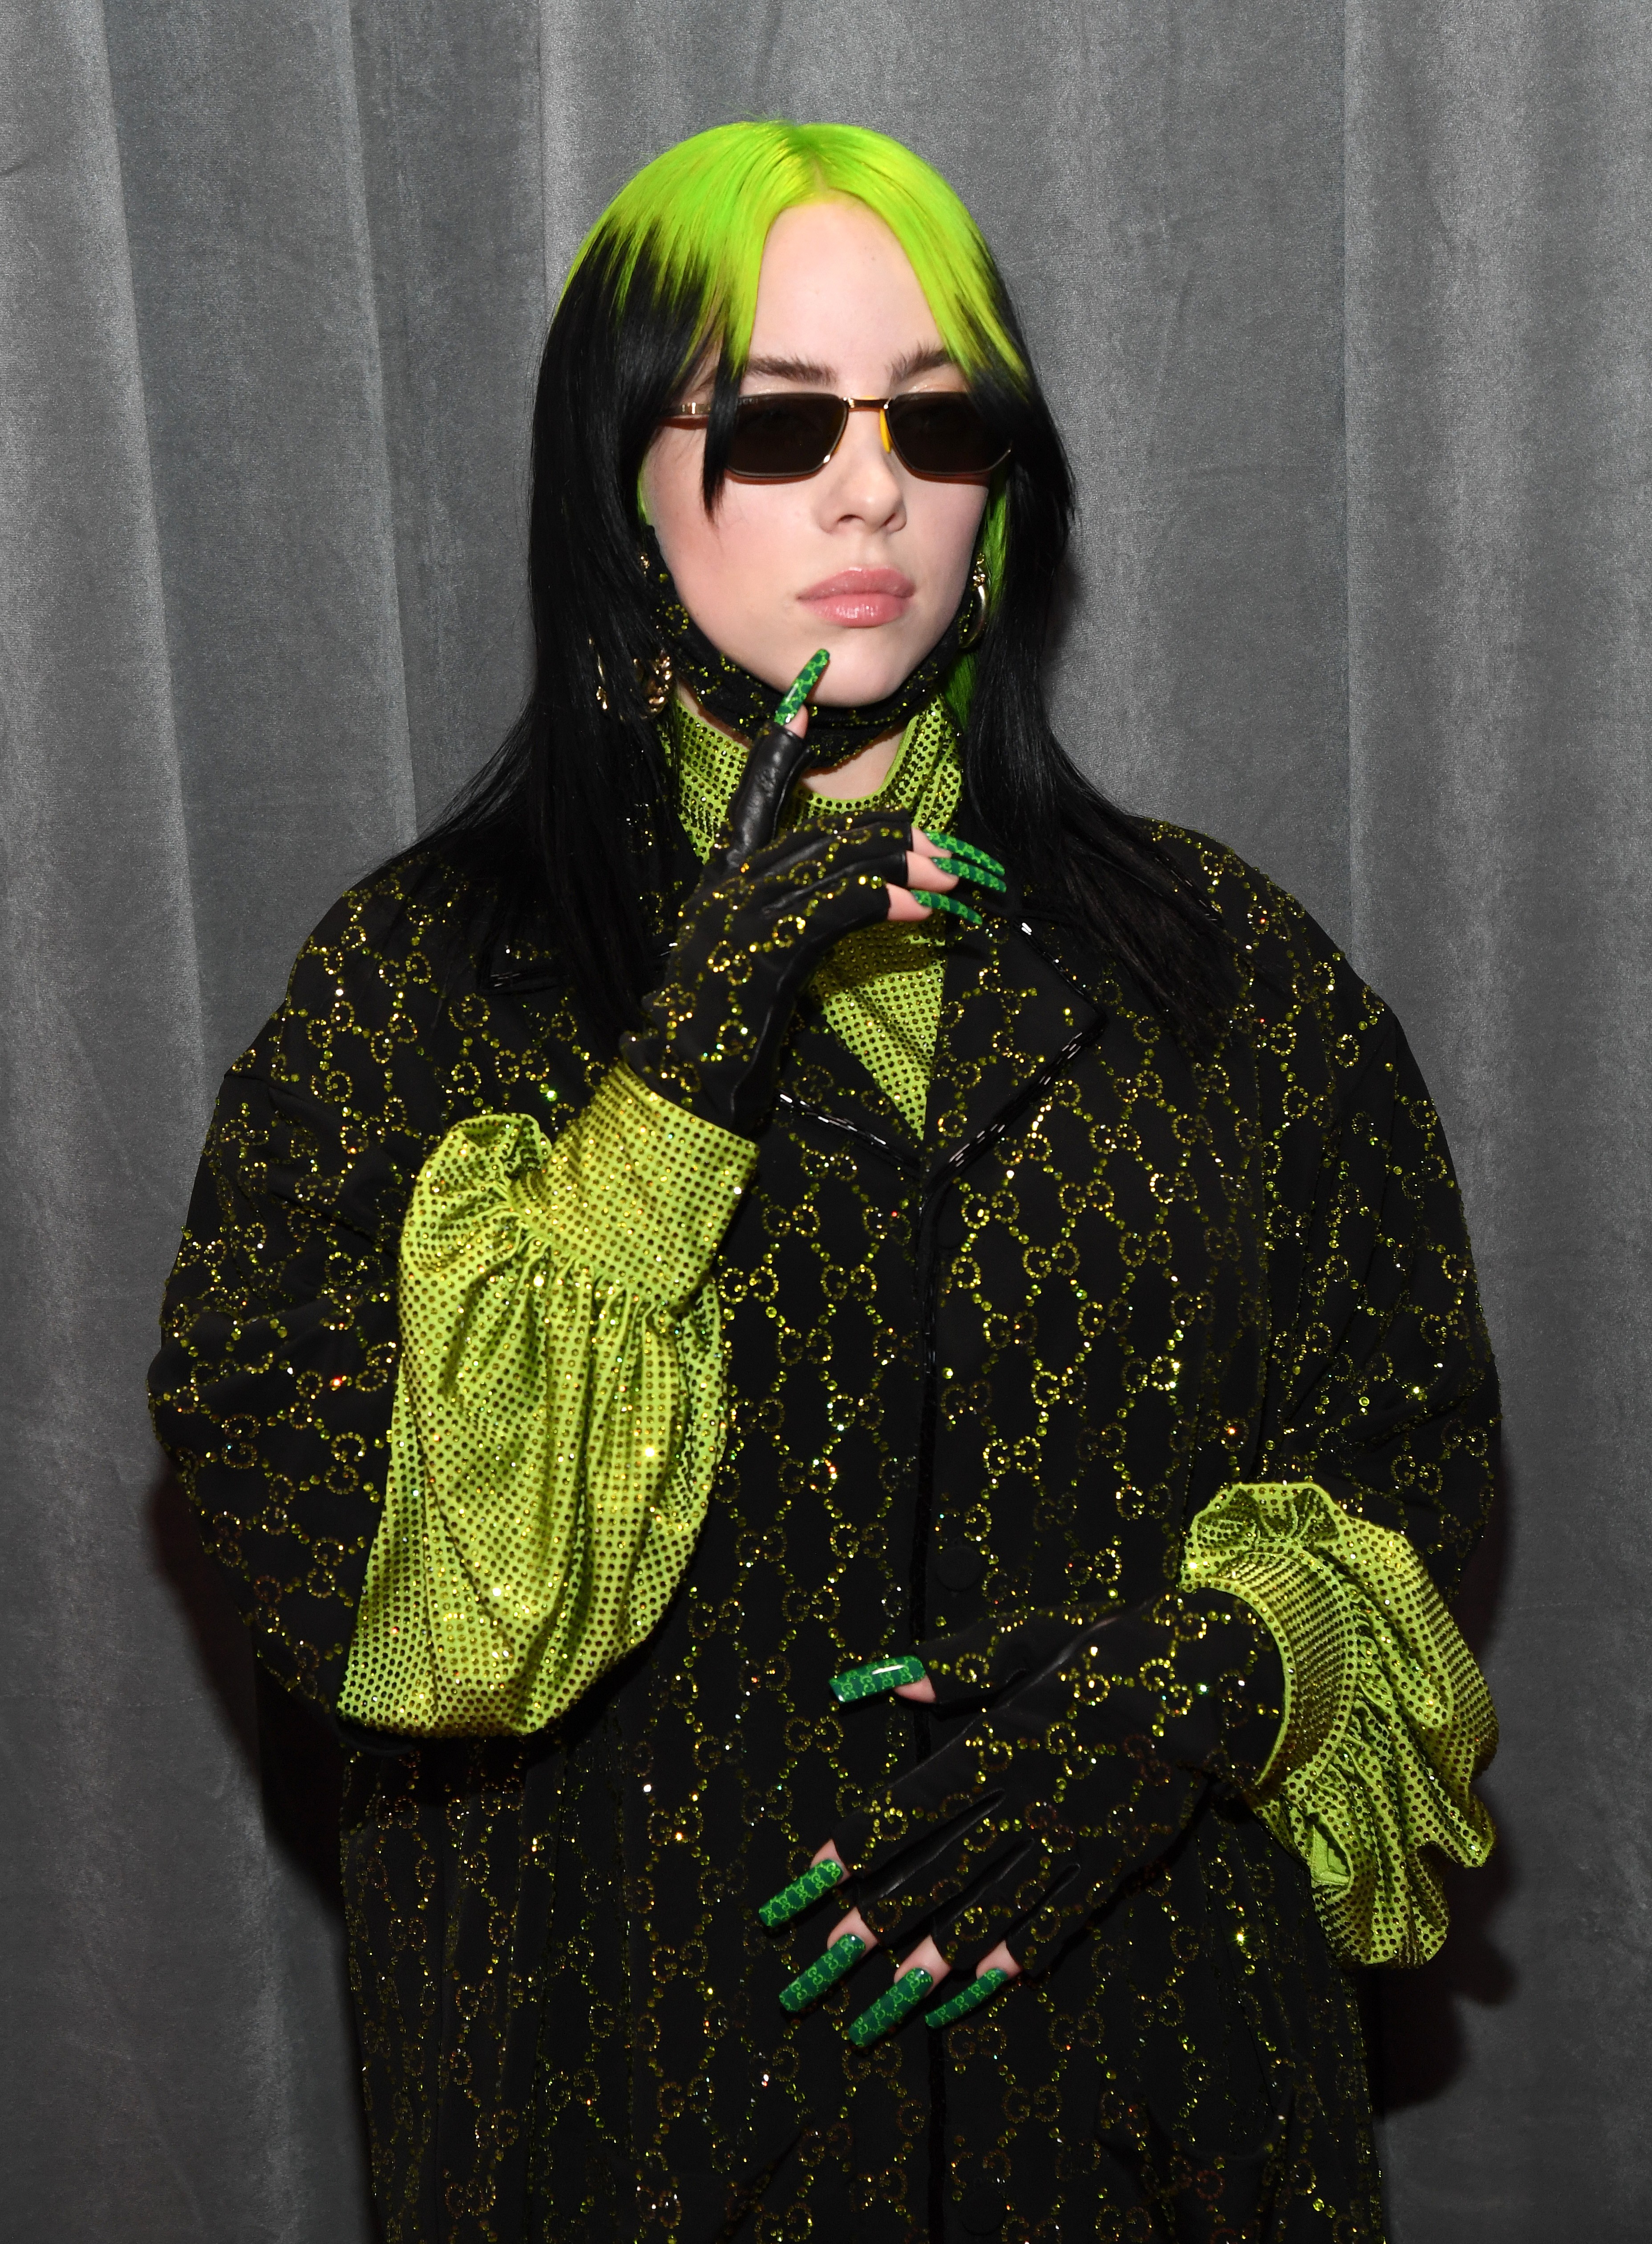 LOS ANGELES, CALIFORNIA - JANUARY 26: Billie Eilish attends the 62nd Annual GRAMMY Awards at STAPLES Center on January 26, 2020 in Los Angeles, California. (Photo by Kevin Mazur/Getty Images for The Recording Academy) (Foto: Getty Images for The Recording A)